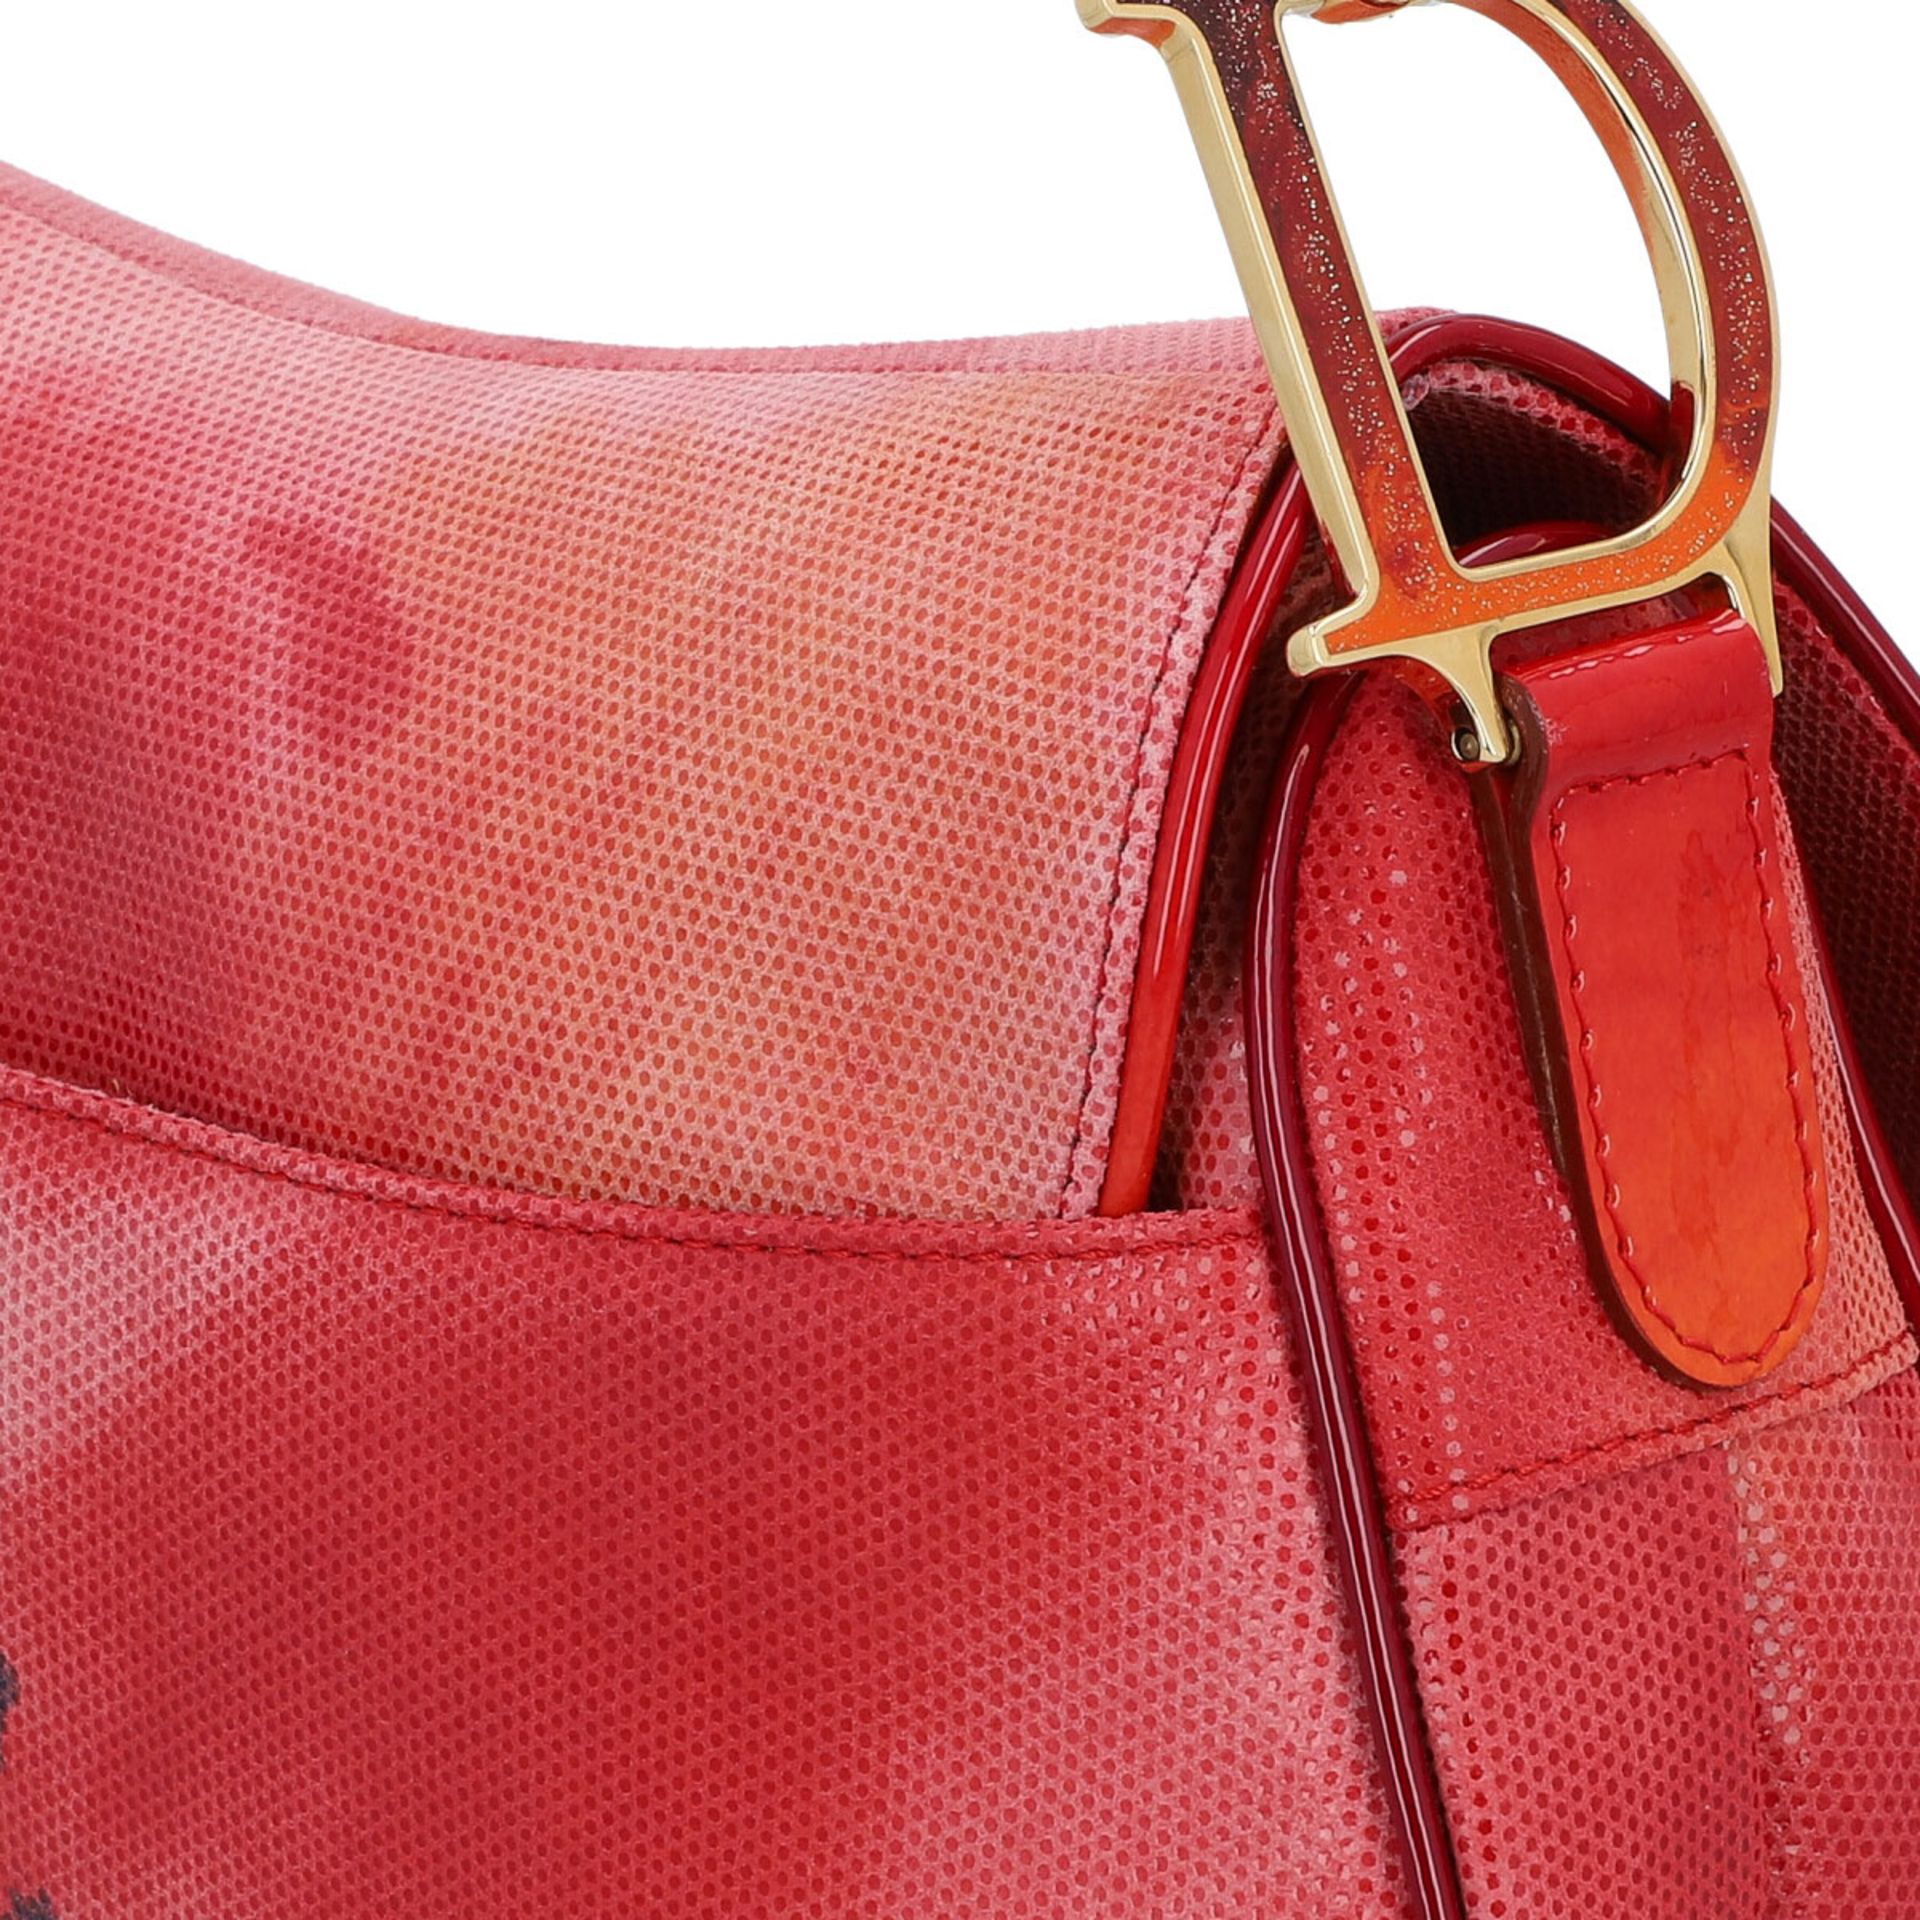 DIOR Schultertasche "SADDLE BAG", Koll.: 2001. - Image 7 of 7